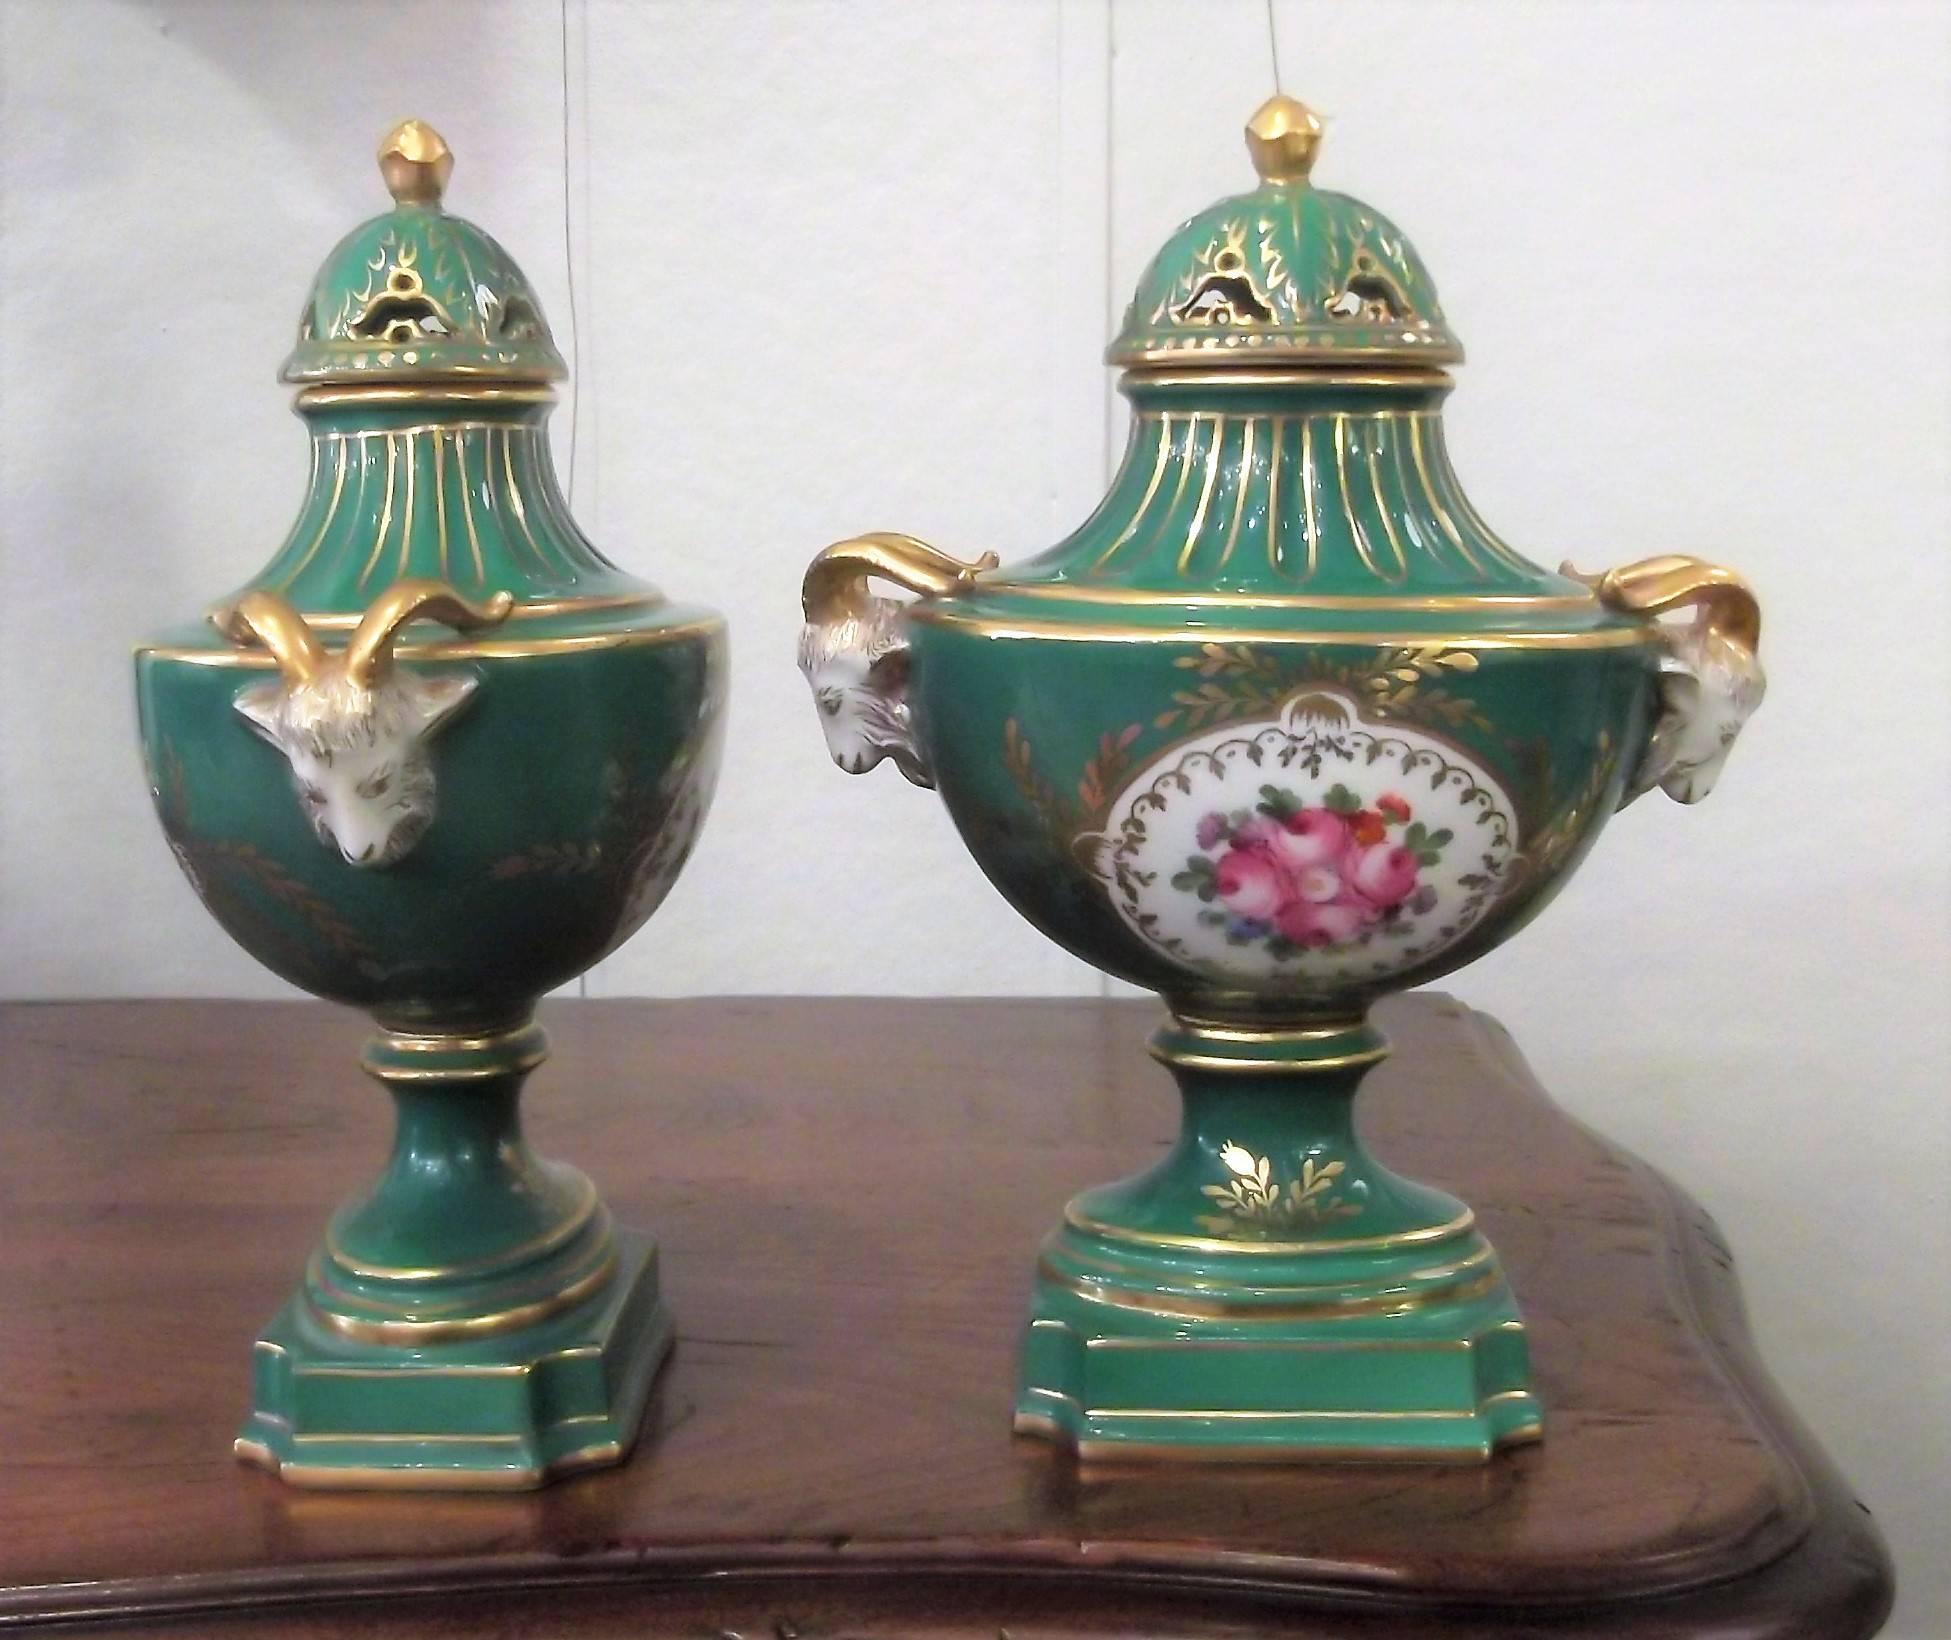 A diminutive pair of hand-painted porcelain ram's head urns with hand gilded decoration. The lids are hand pierced with small gilt finials. The center cartouches are painted Dresden flowers with a white background. The blue under glaze mark is from